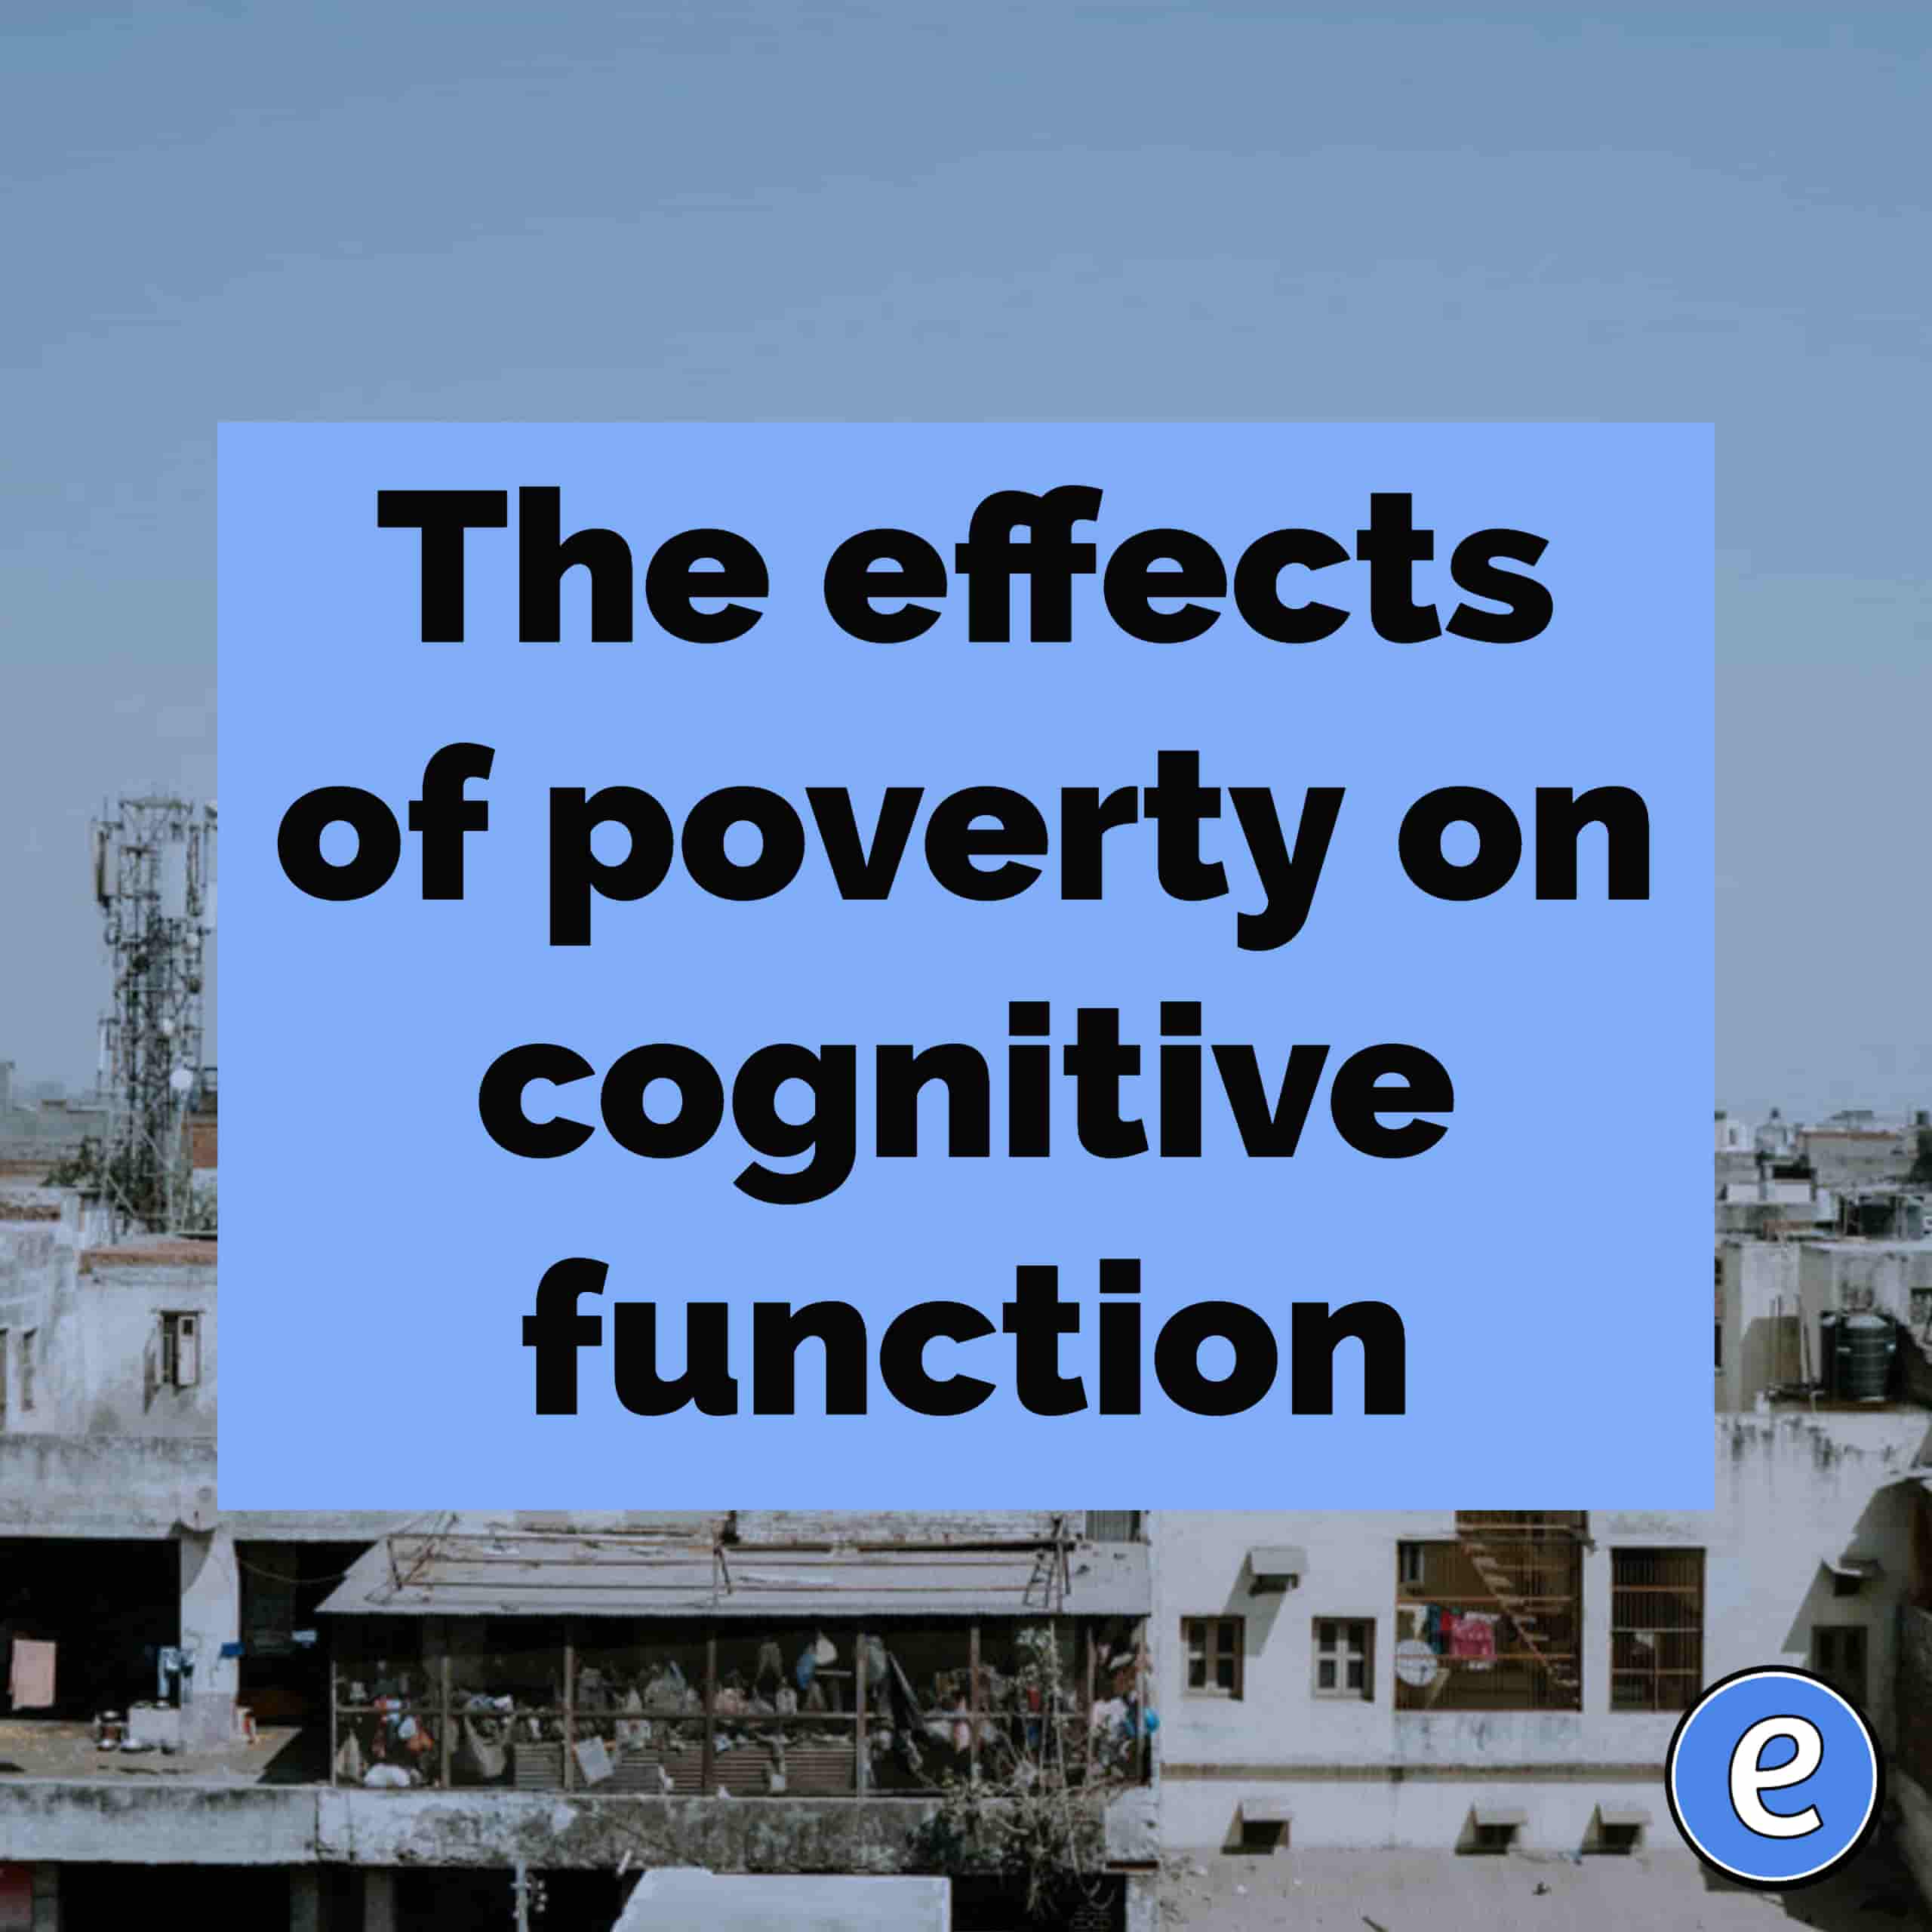 The effects of poverty on cognitive function